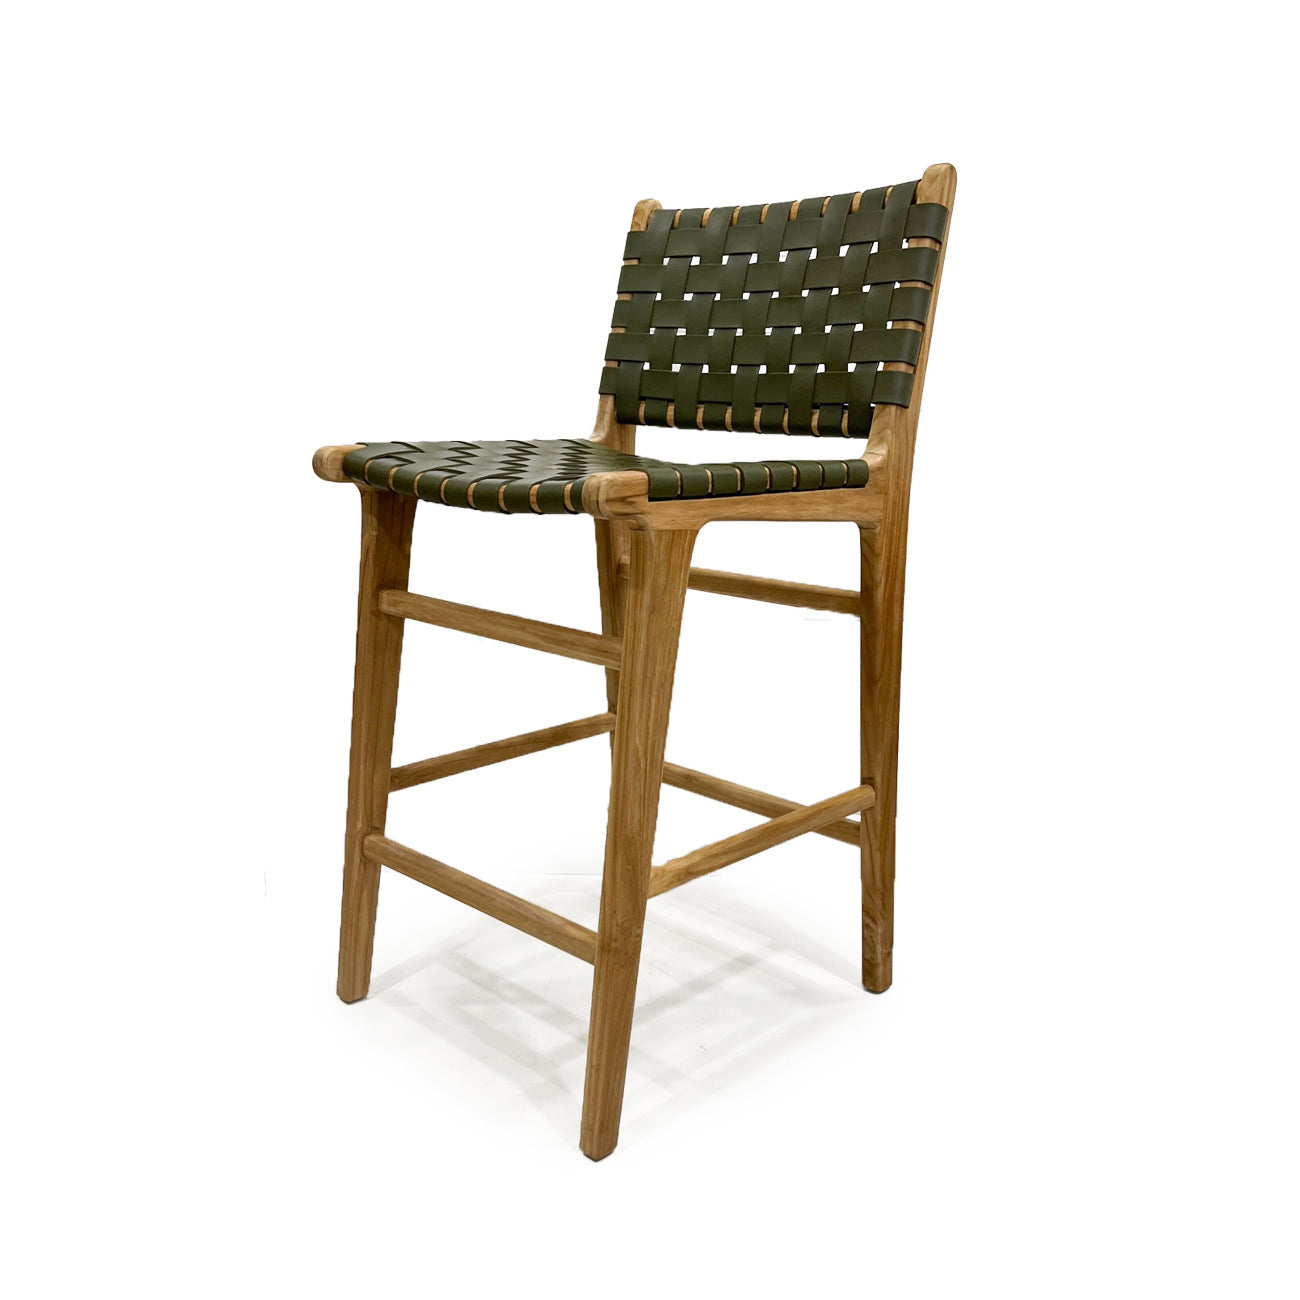 Jubilee Leather Woven Counter Stool – Olive - Notbrand